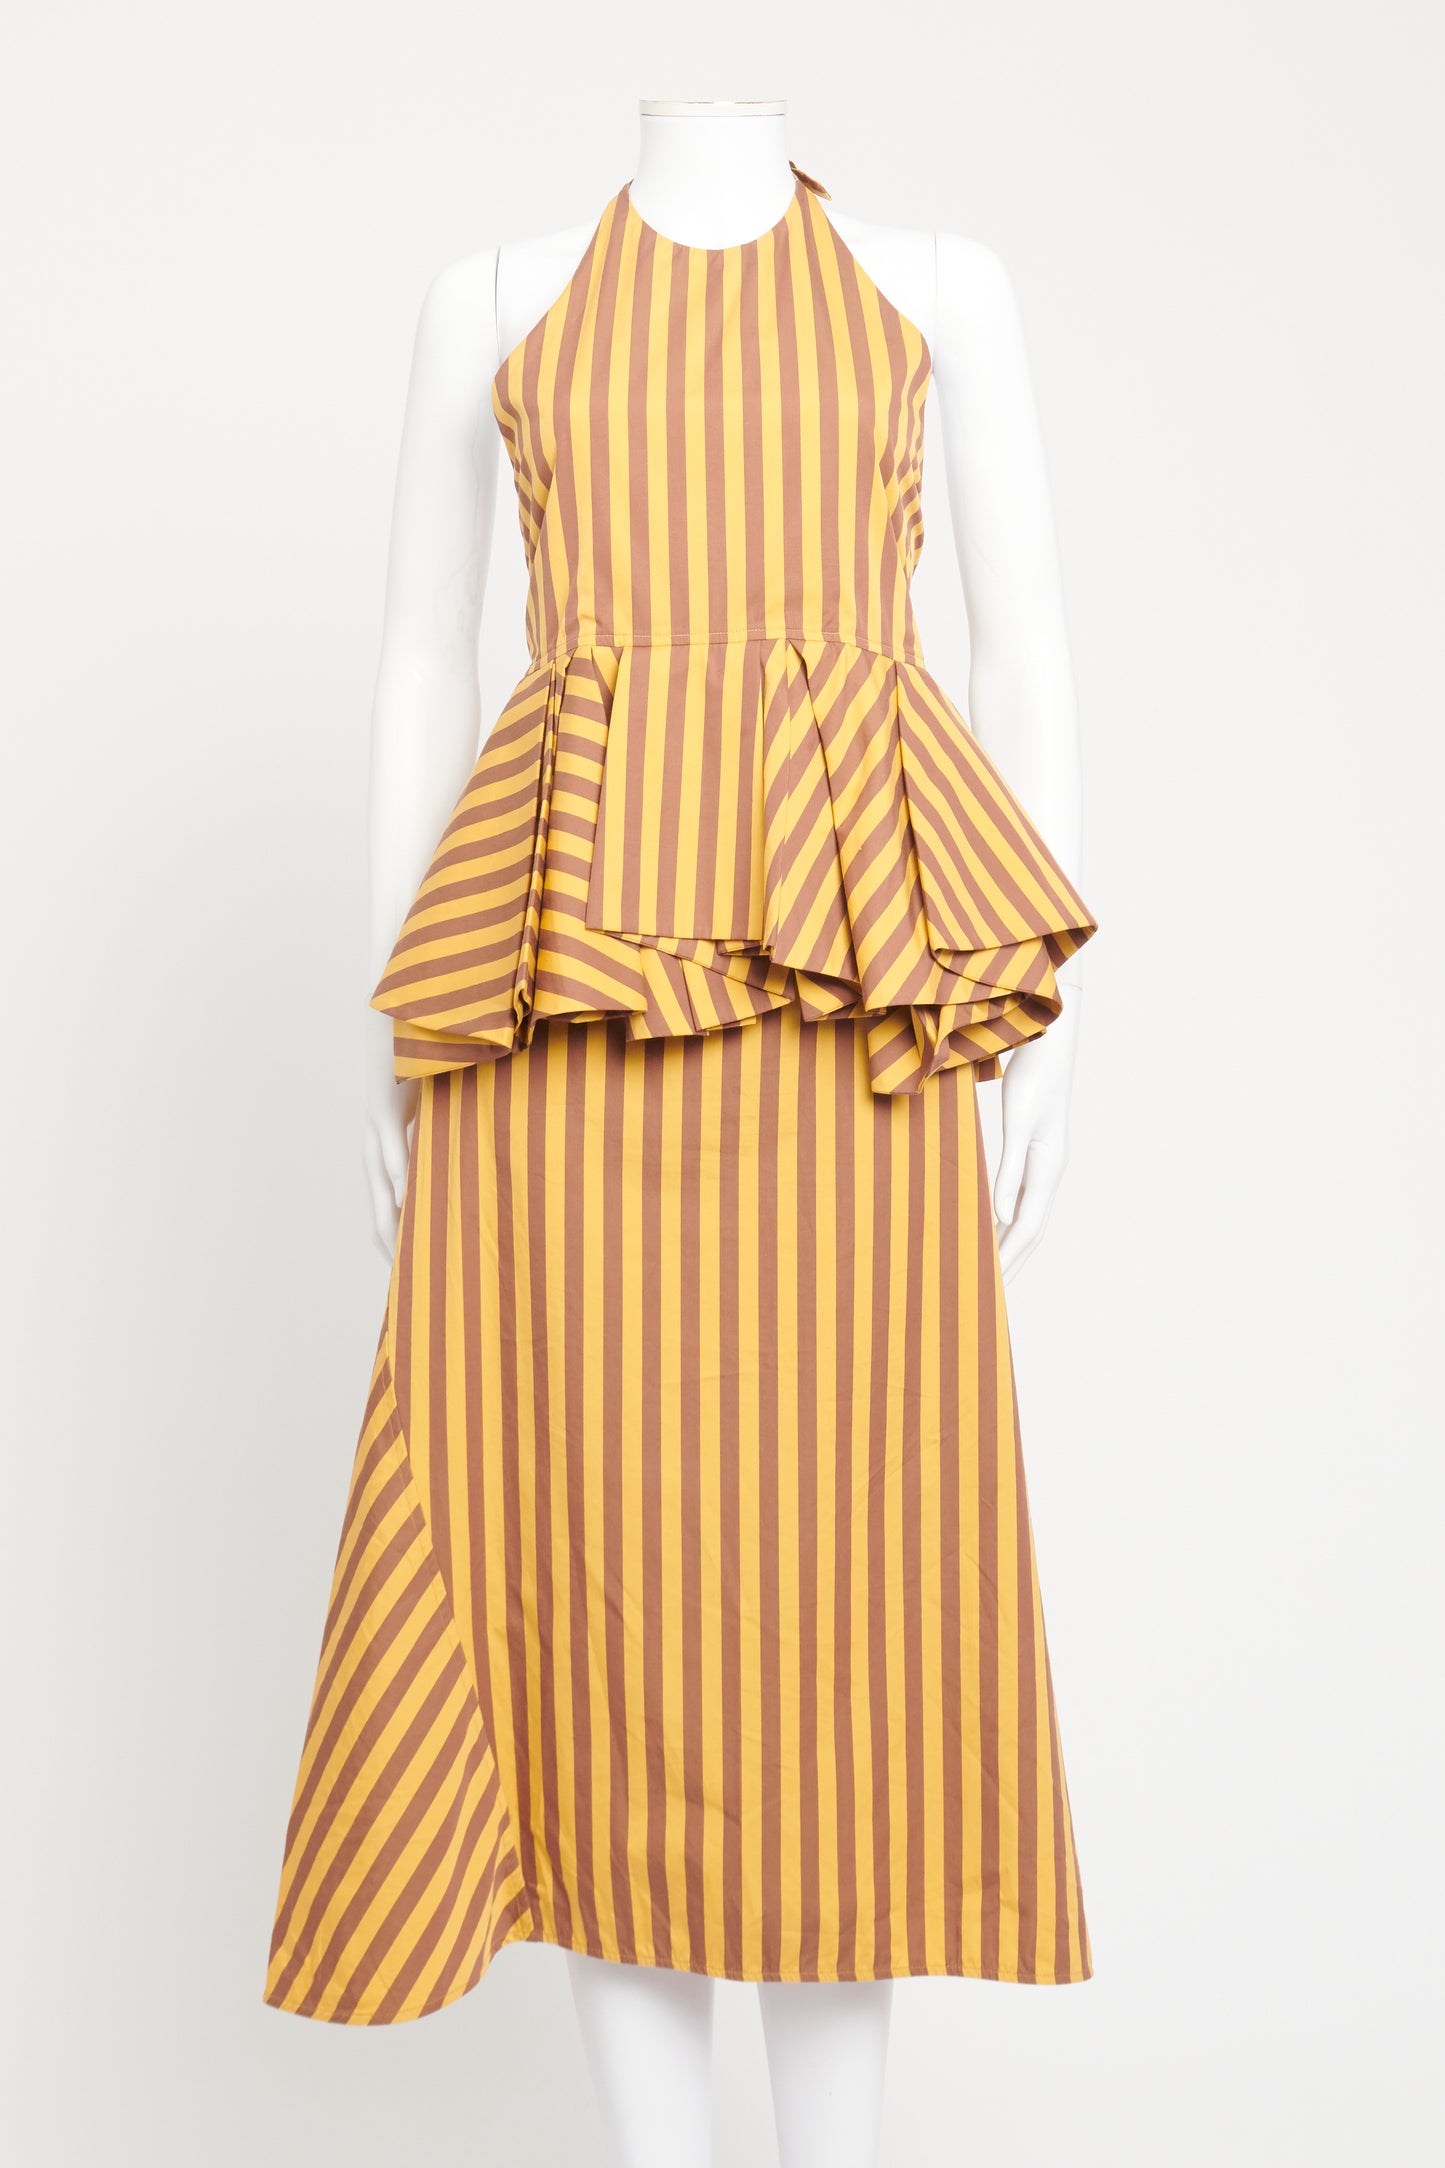 Yellow and Brown Striped A-line Preowned Skirt